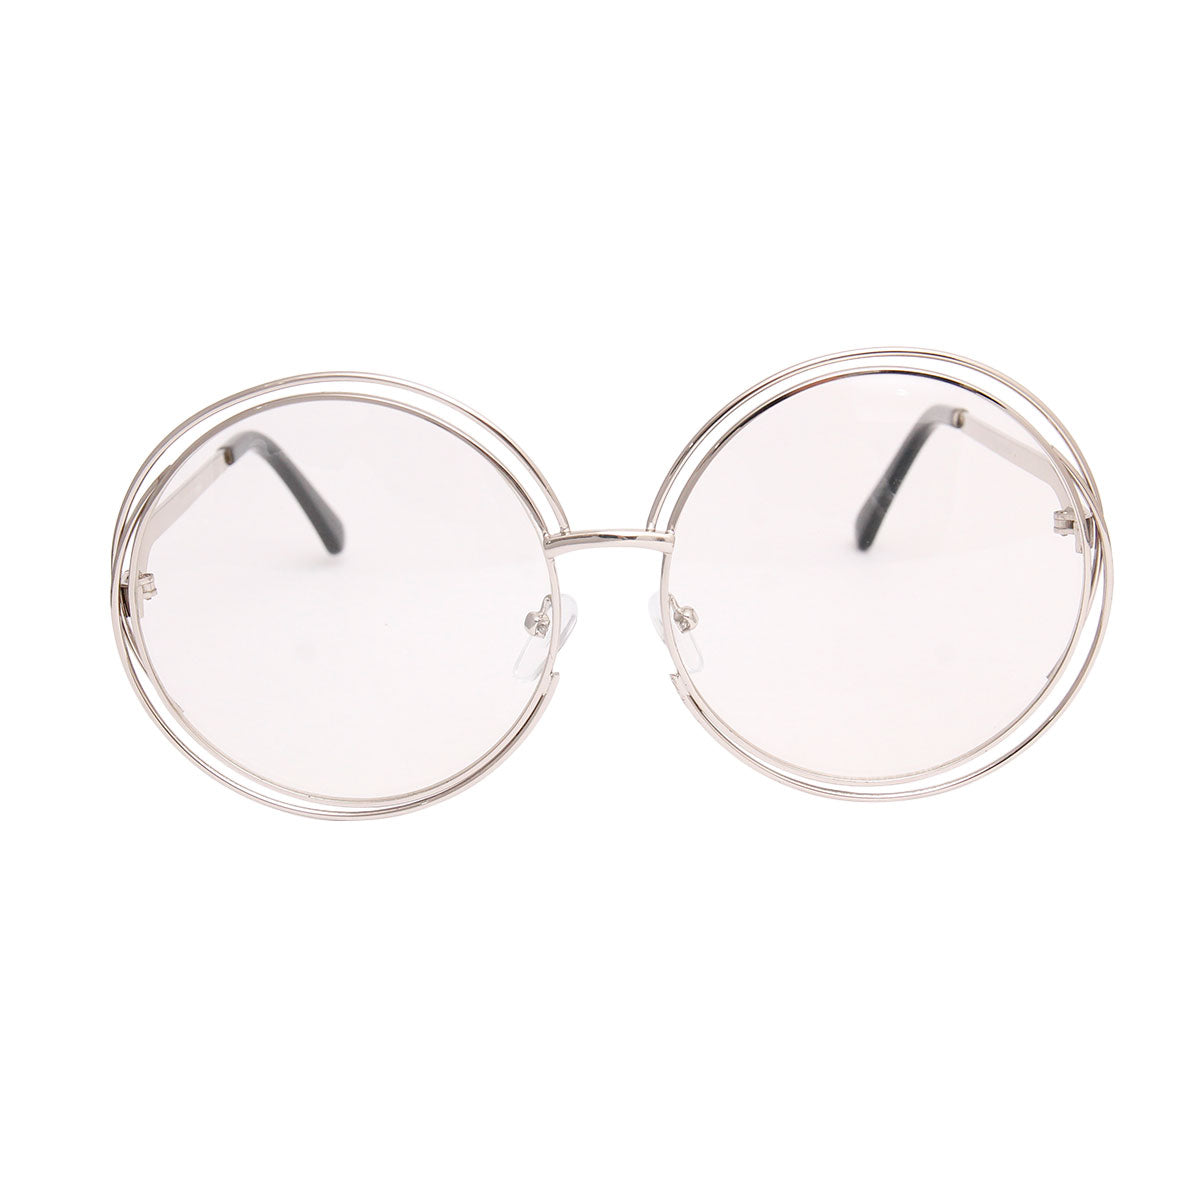 Silver Double Frame Clear Glasses